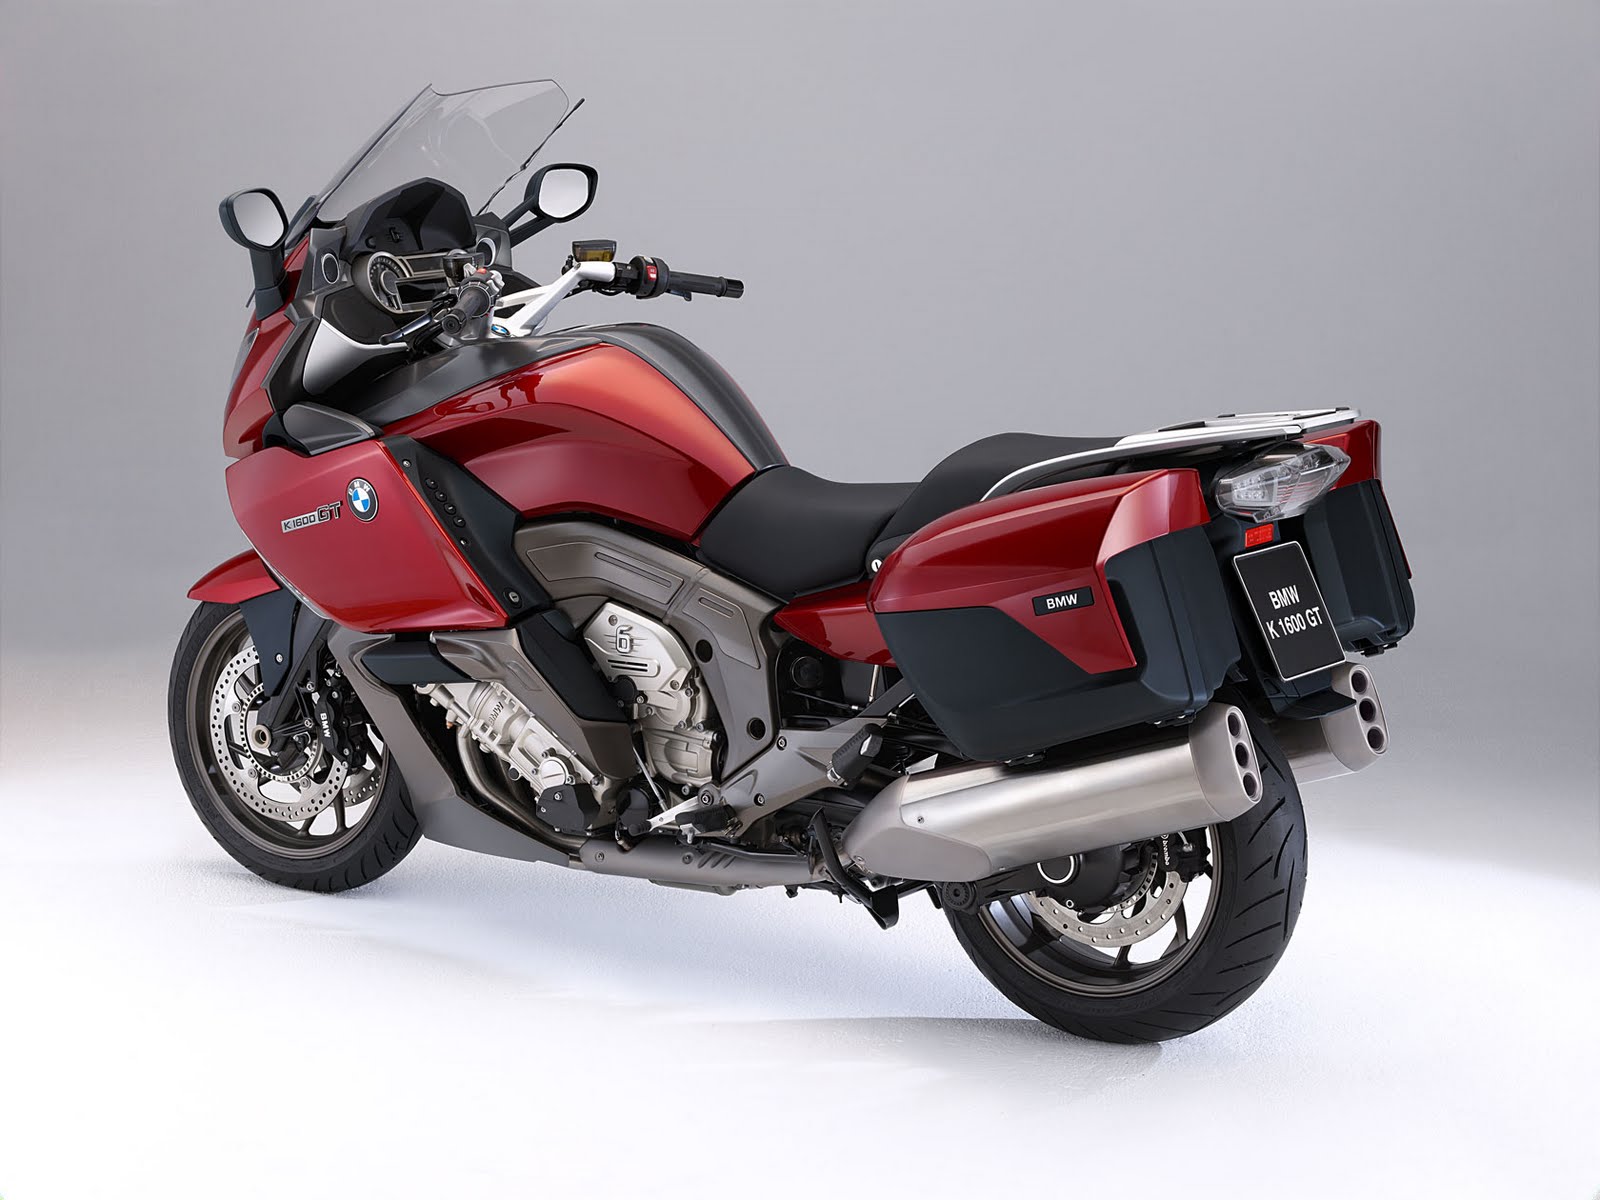 BMW K1600GT Best Sport-Touring Bike 2011 |MOTORCYCLES SPECIFICATIONS